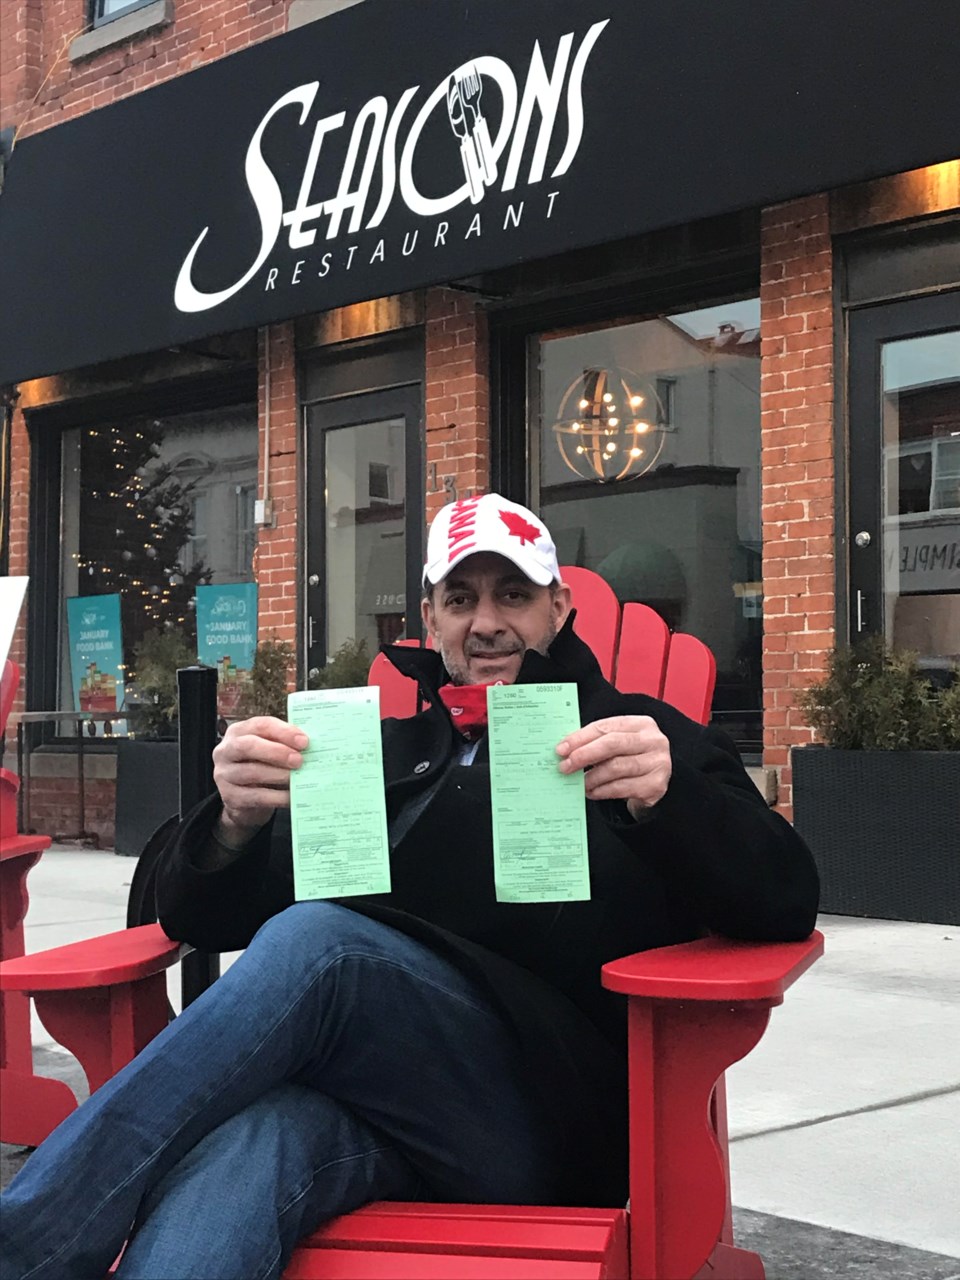 Seasons Tickets: $1760 in Covid fines for struggling restaurateur